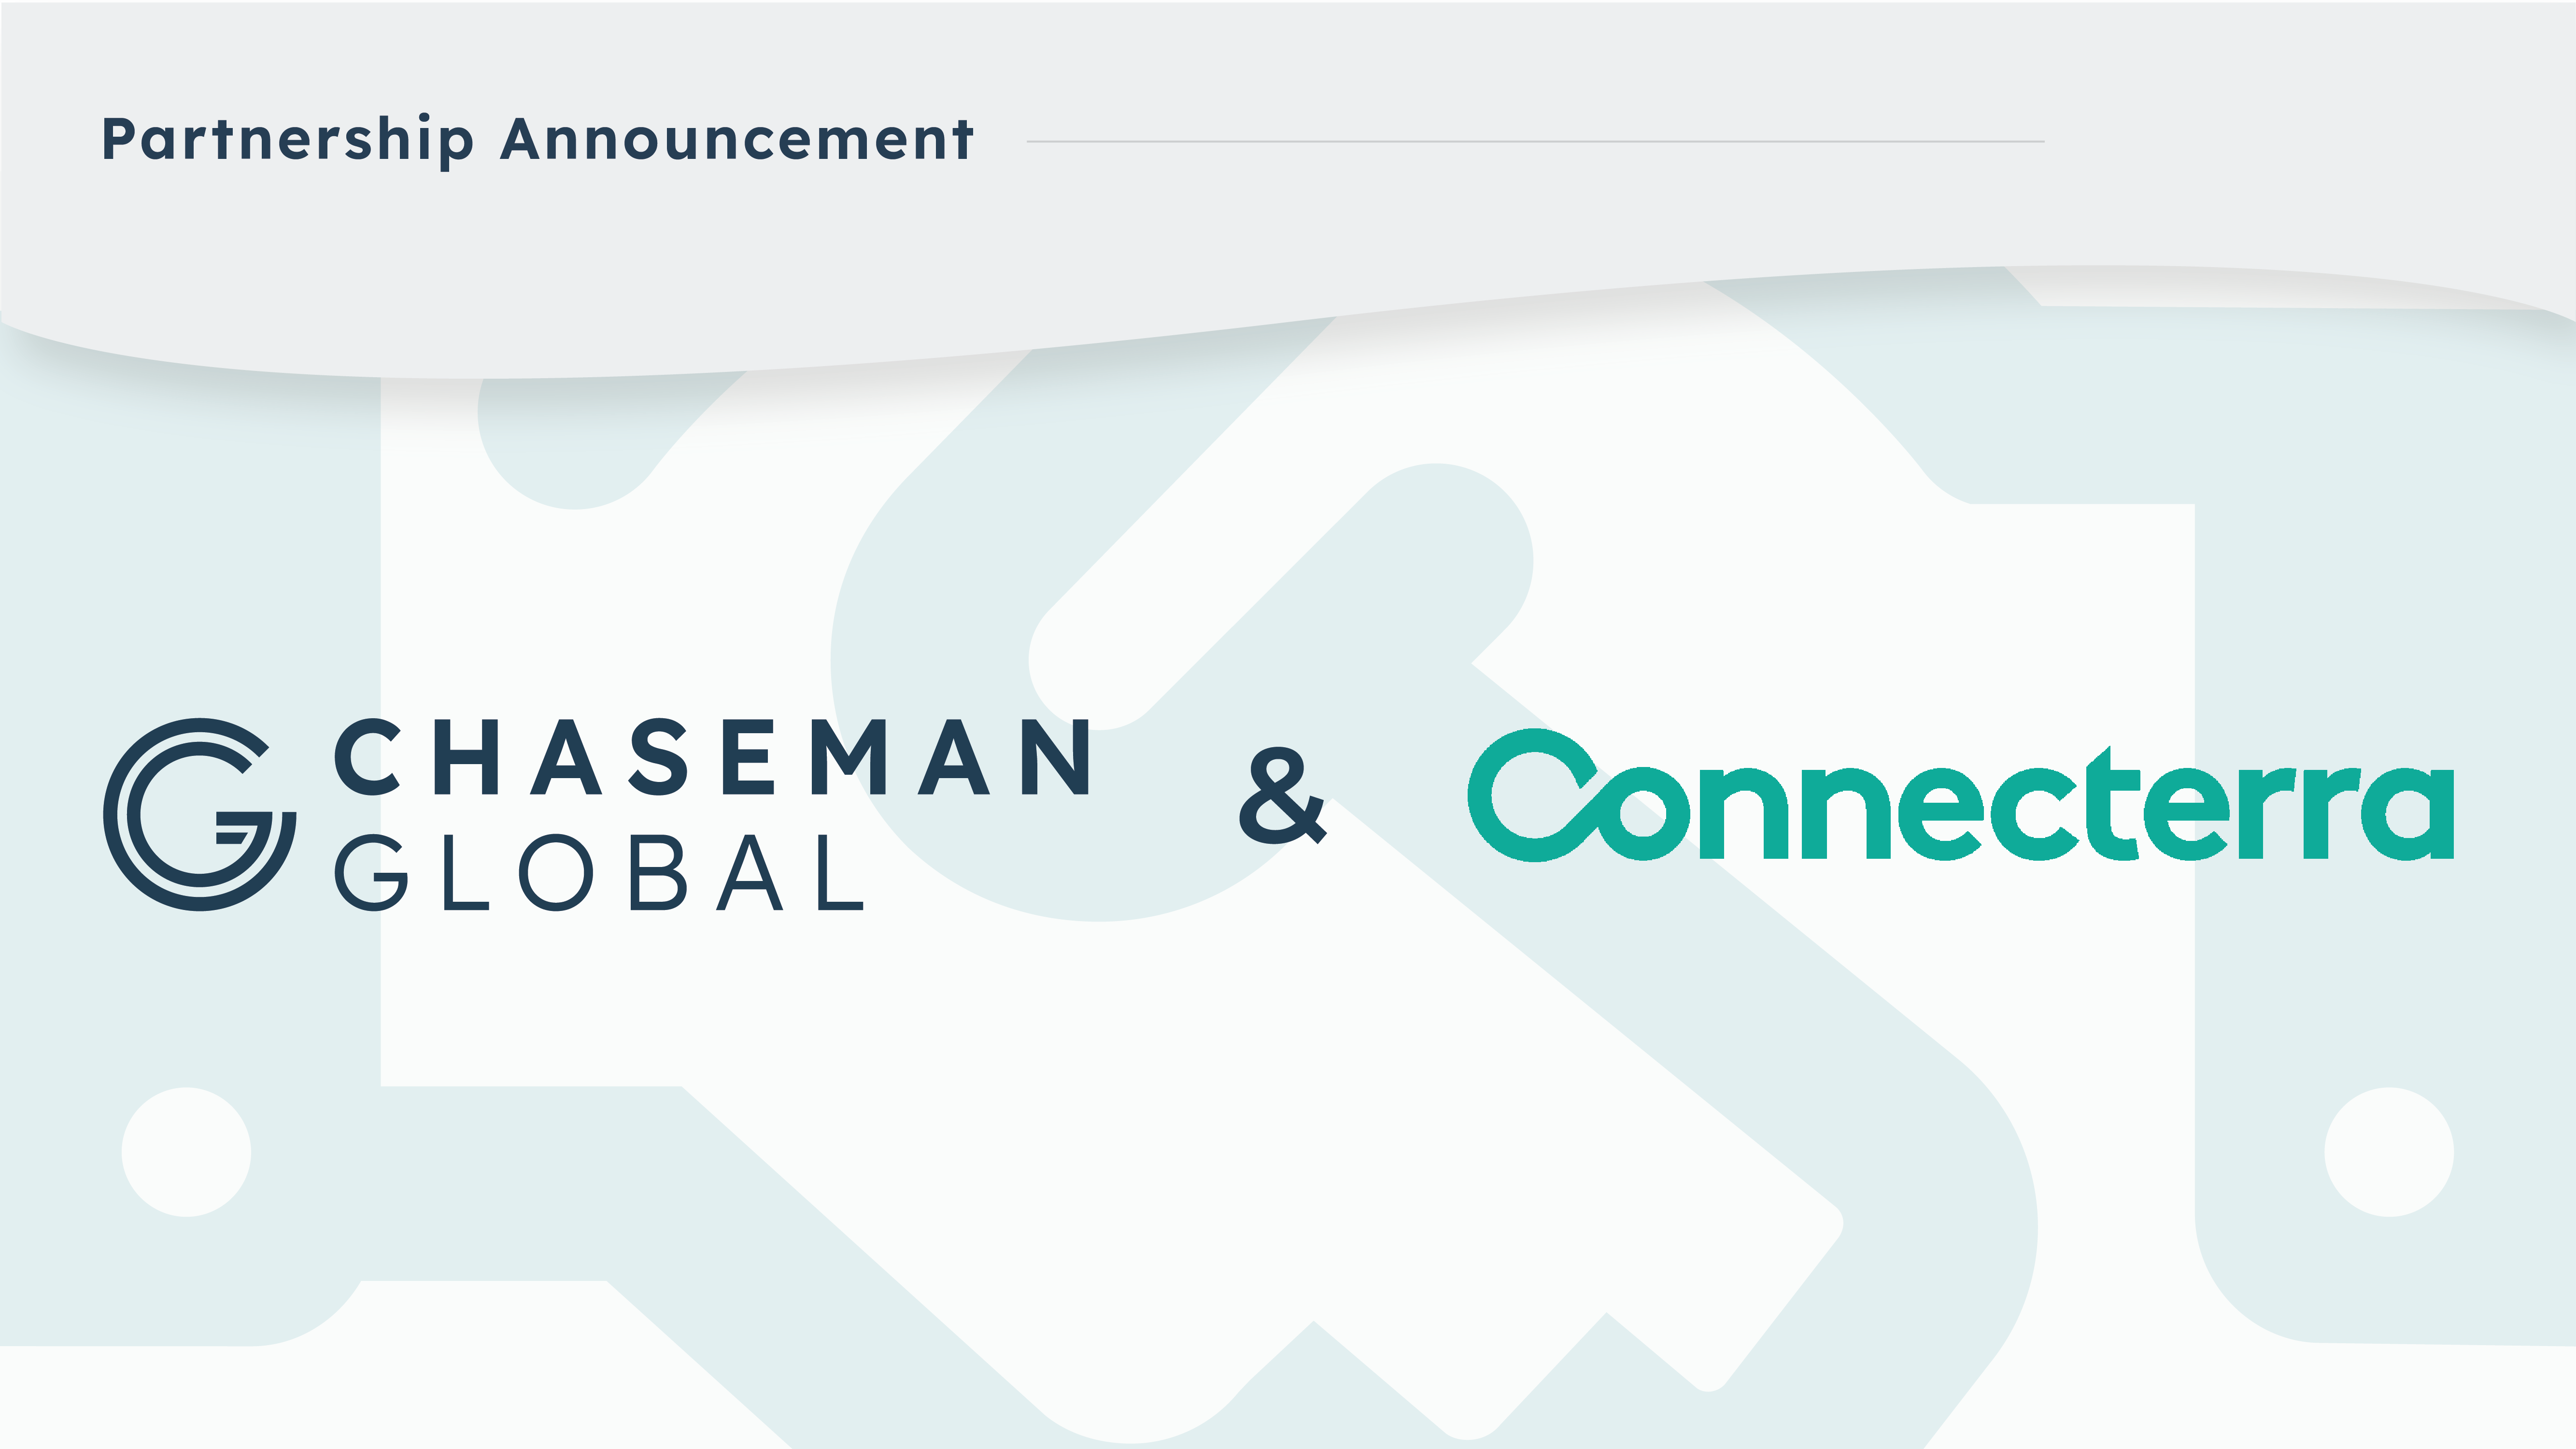  Chaseman Global partners with Connecterra